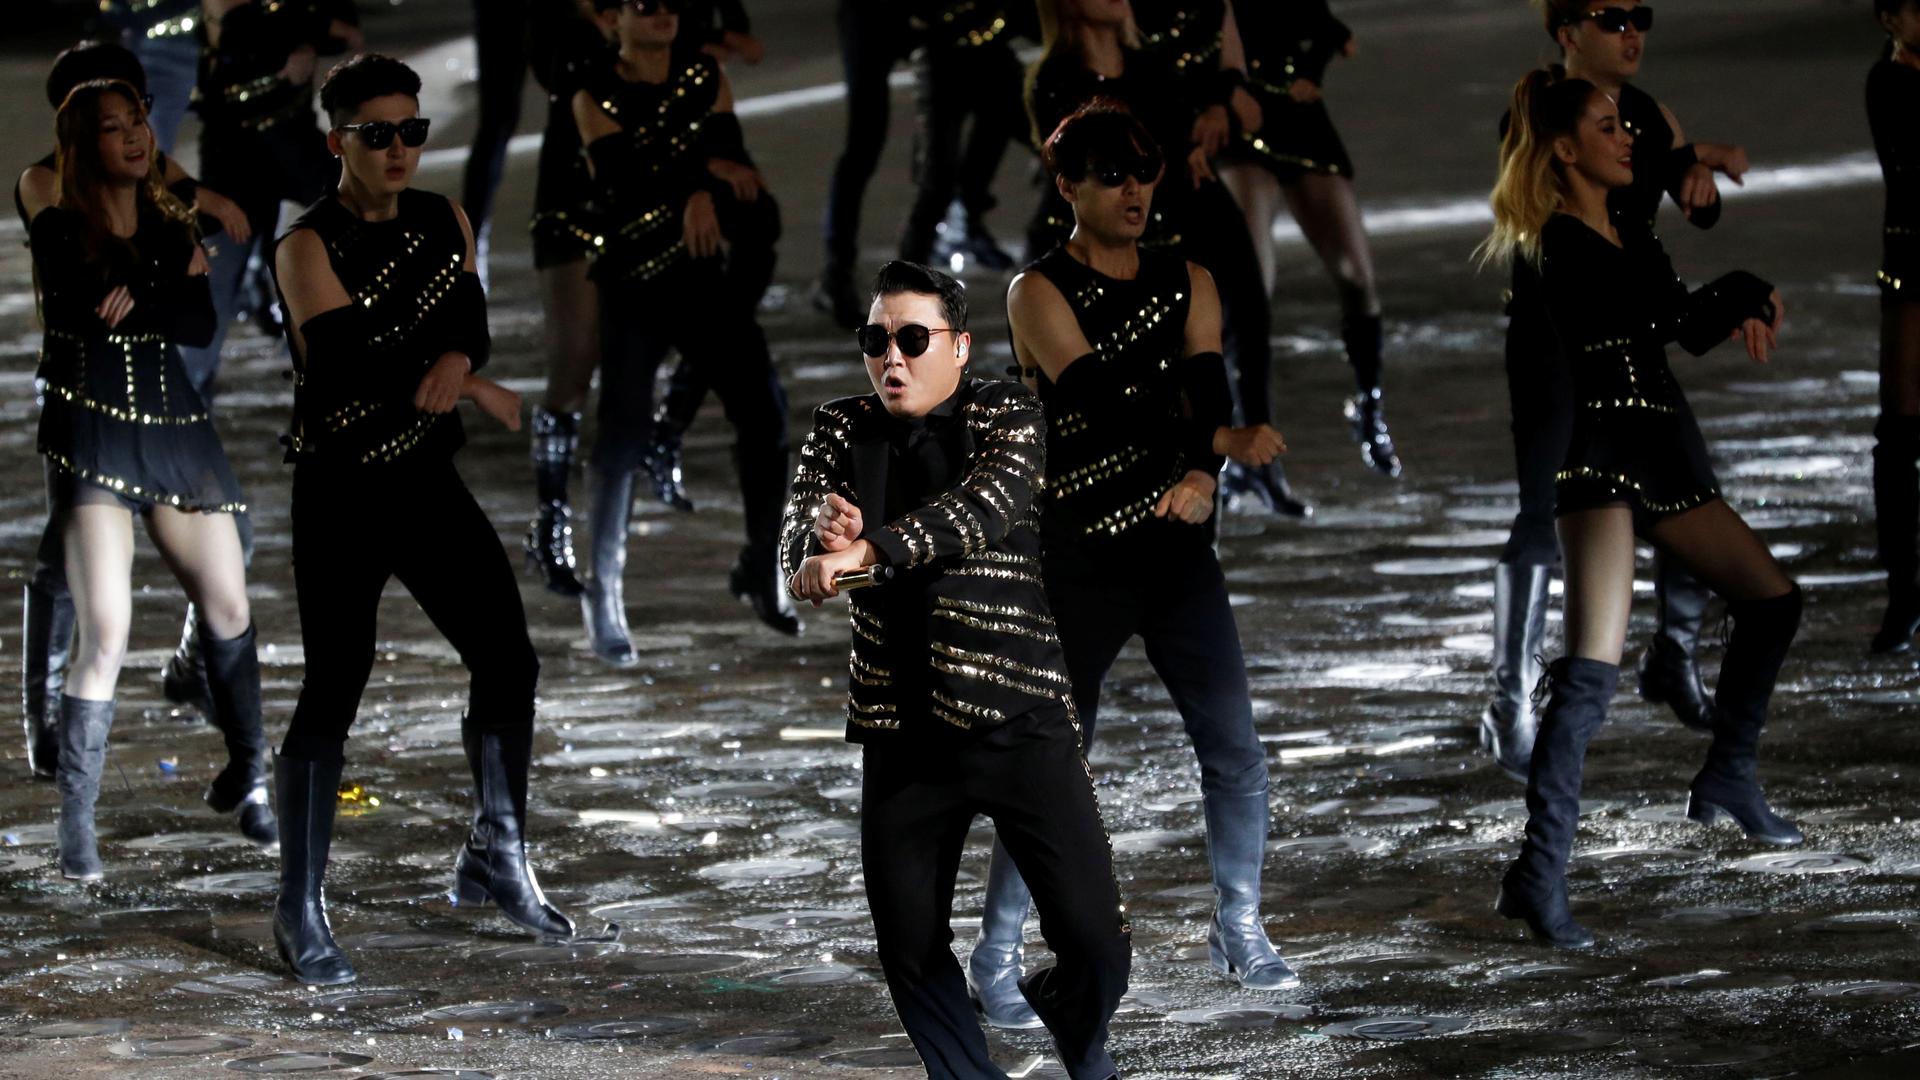 A man wears a black shiny outfit and performs with backup dancers